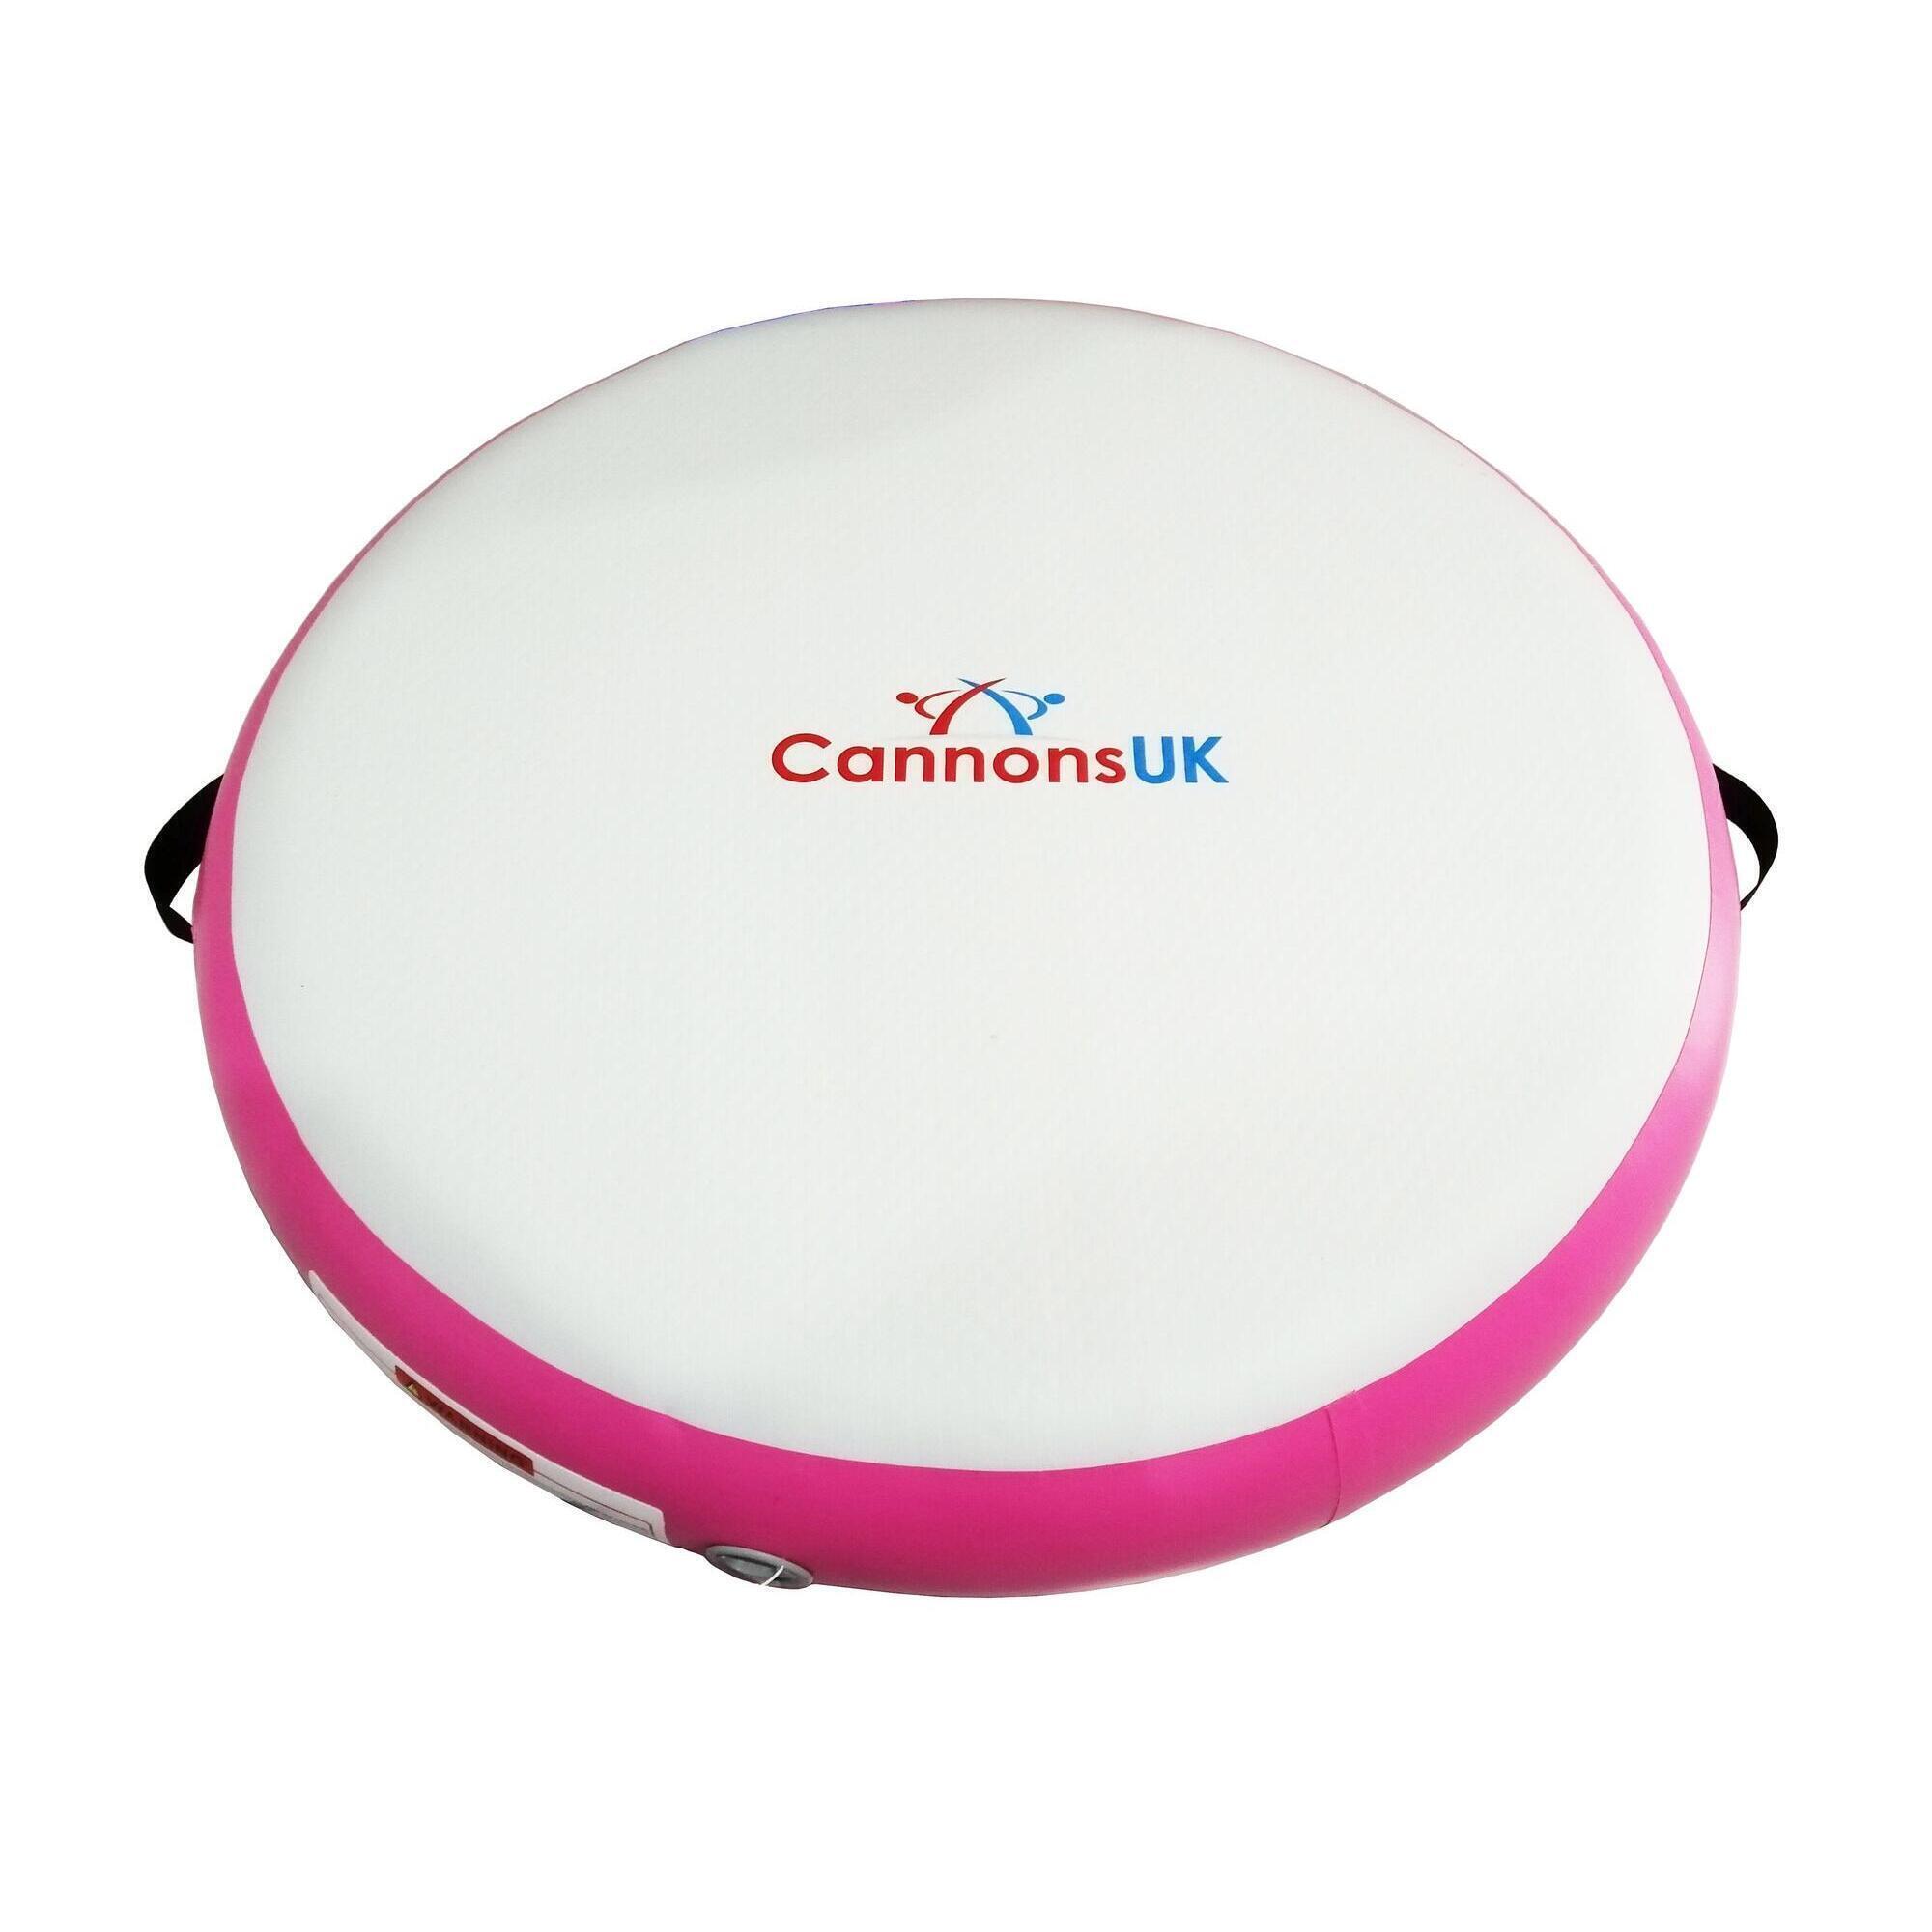 CANNONS UK Cannons UK Air Track Pro Air Spot, Pink